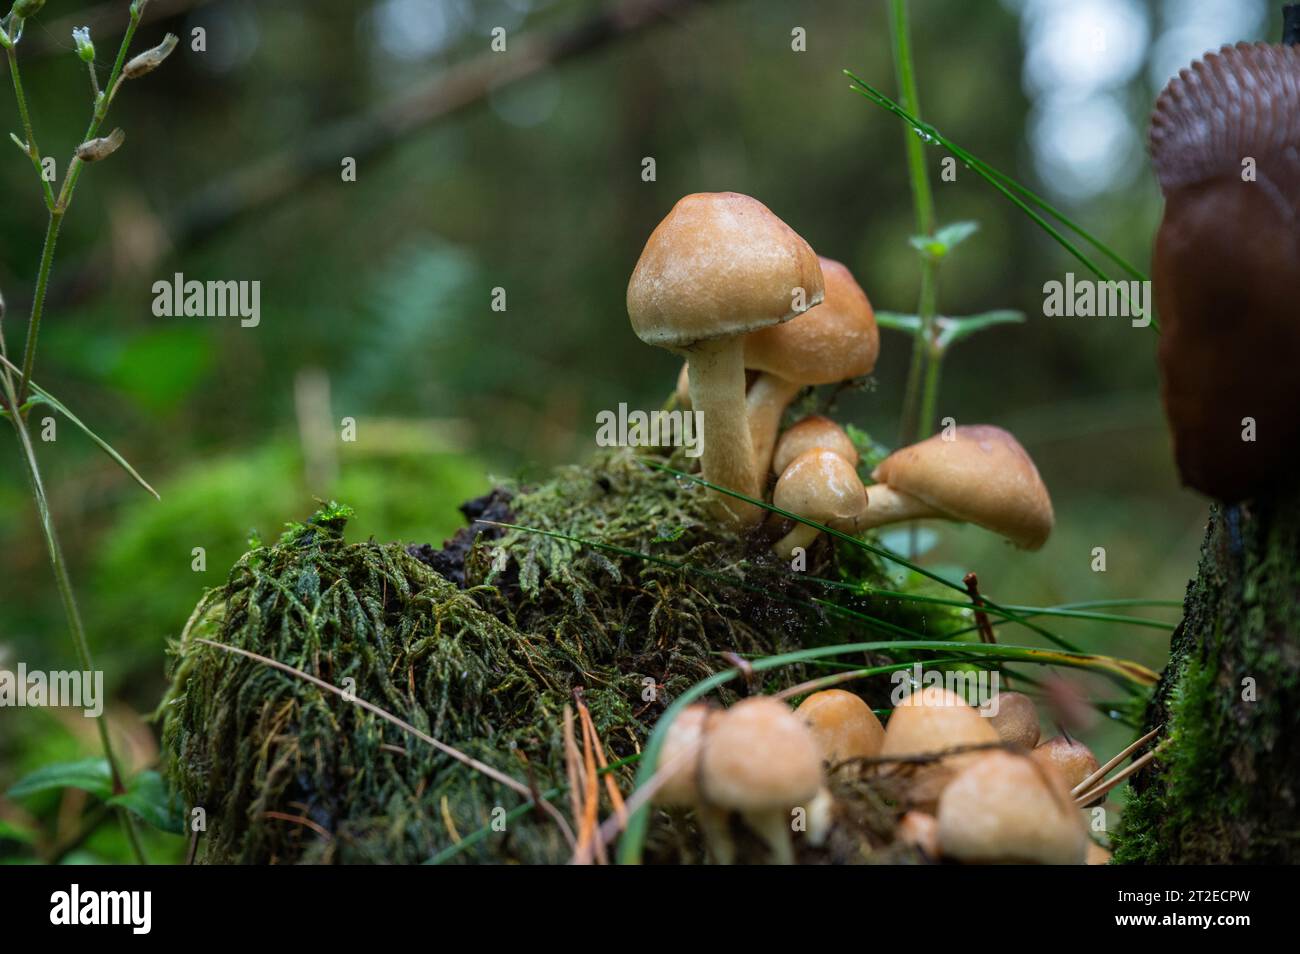 In autumn mushrooms sprout from the forest floor of nature Stock Photo